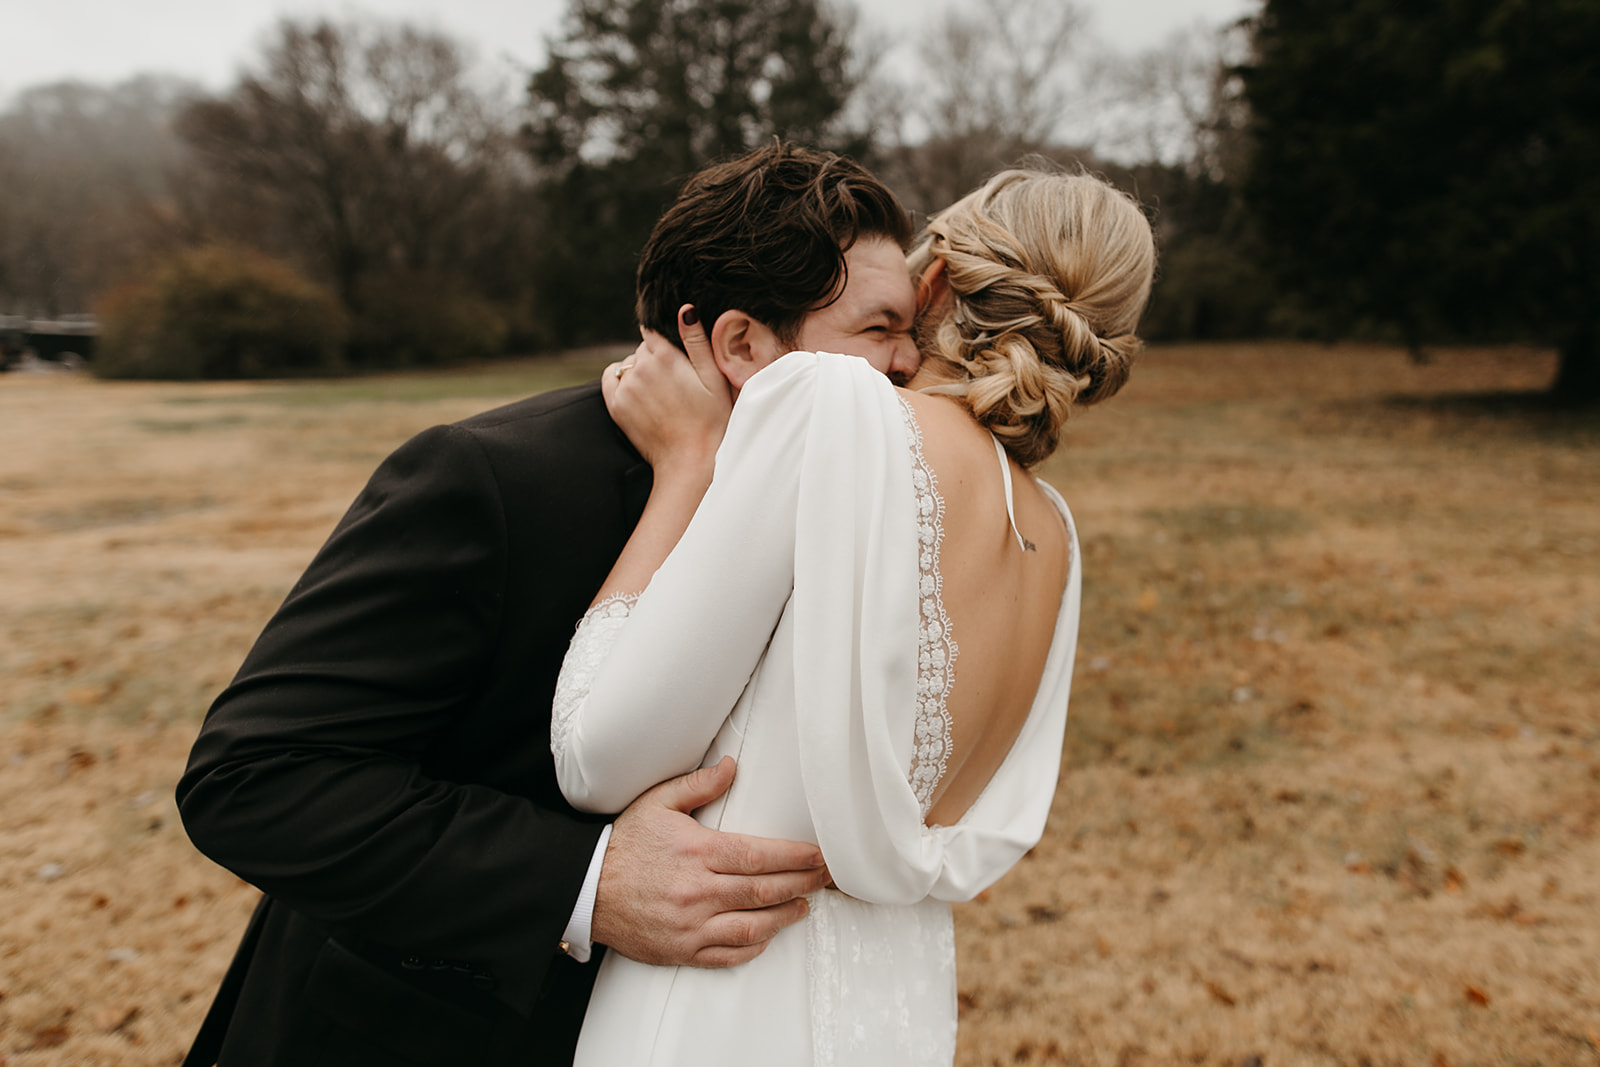 Fun & Romantic Wedding at The Loveless Barn captured by Brooke Taelor featured on Nashville Bride Guide